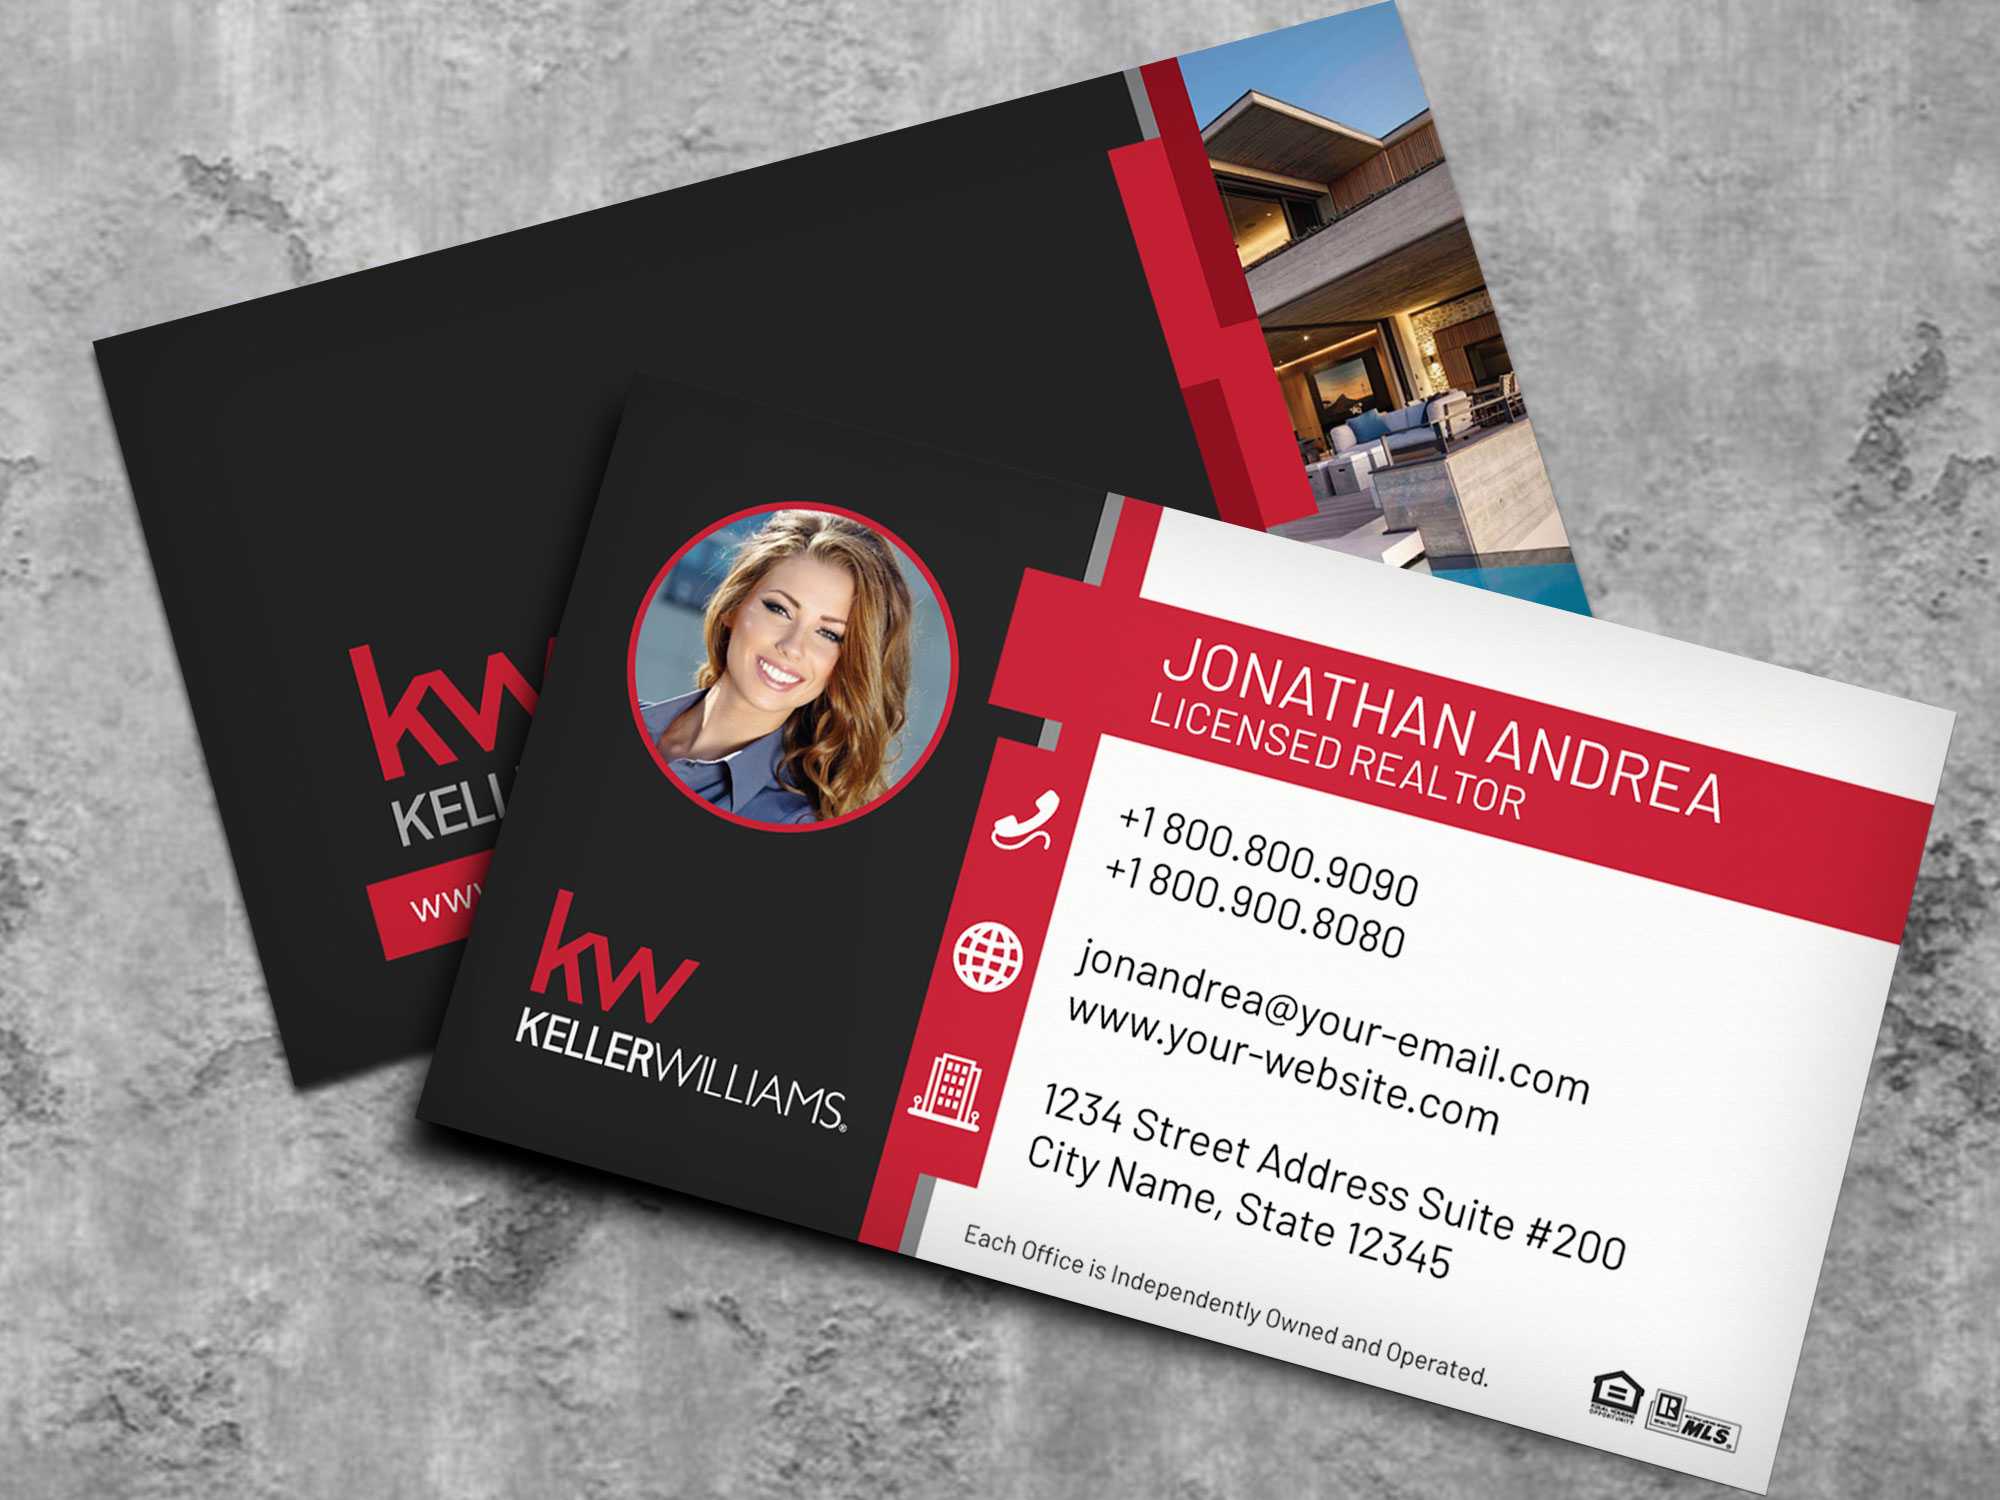 Keller Williams Business Card Template Bc19702Kw Intended For Keller Williams Business Card Templates